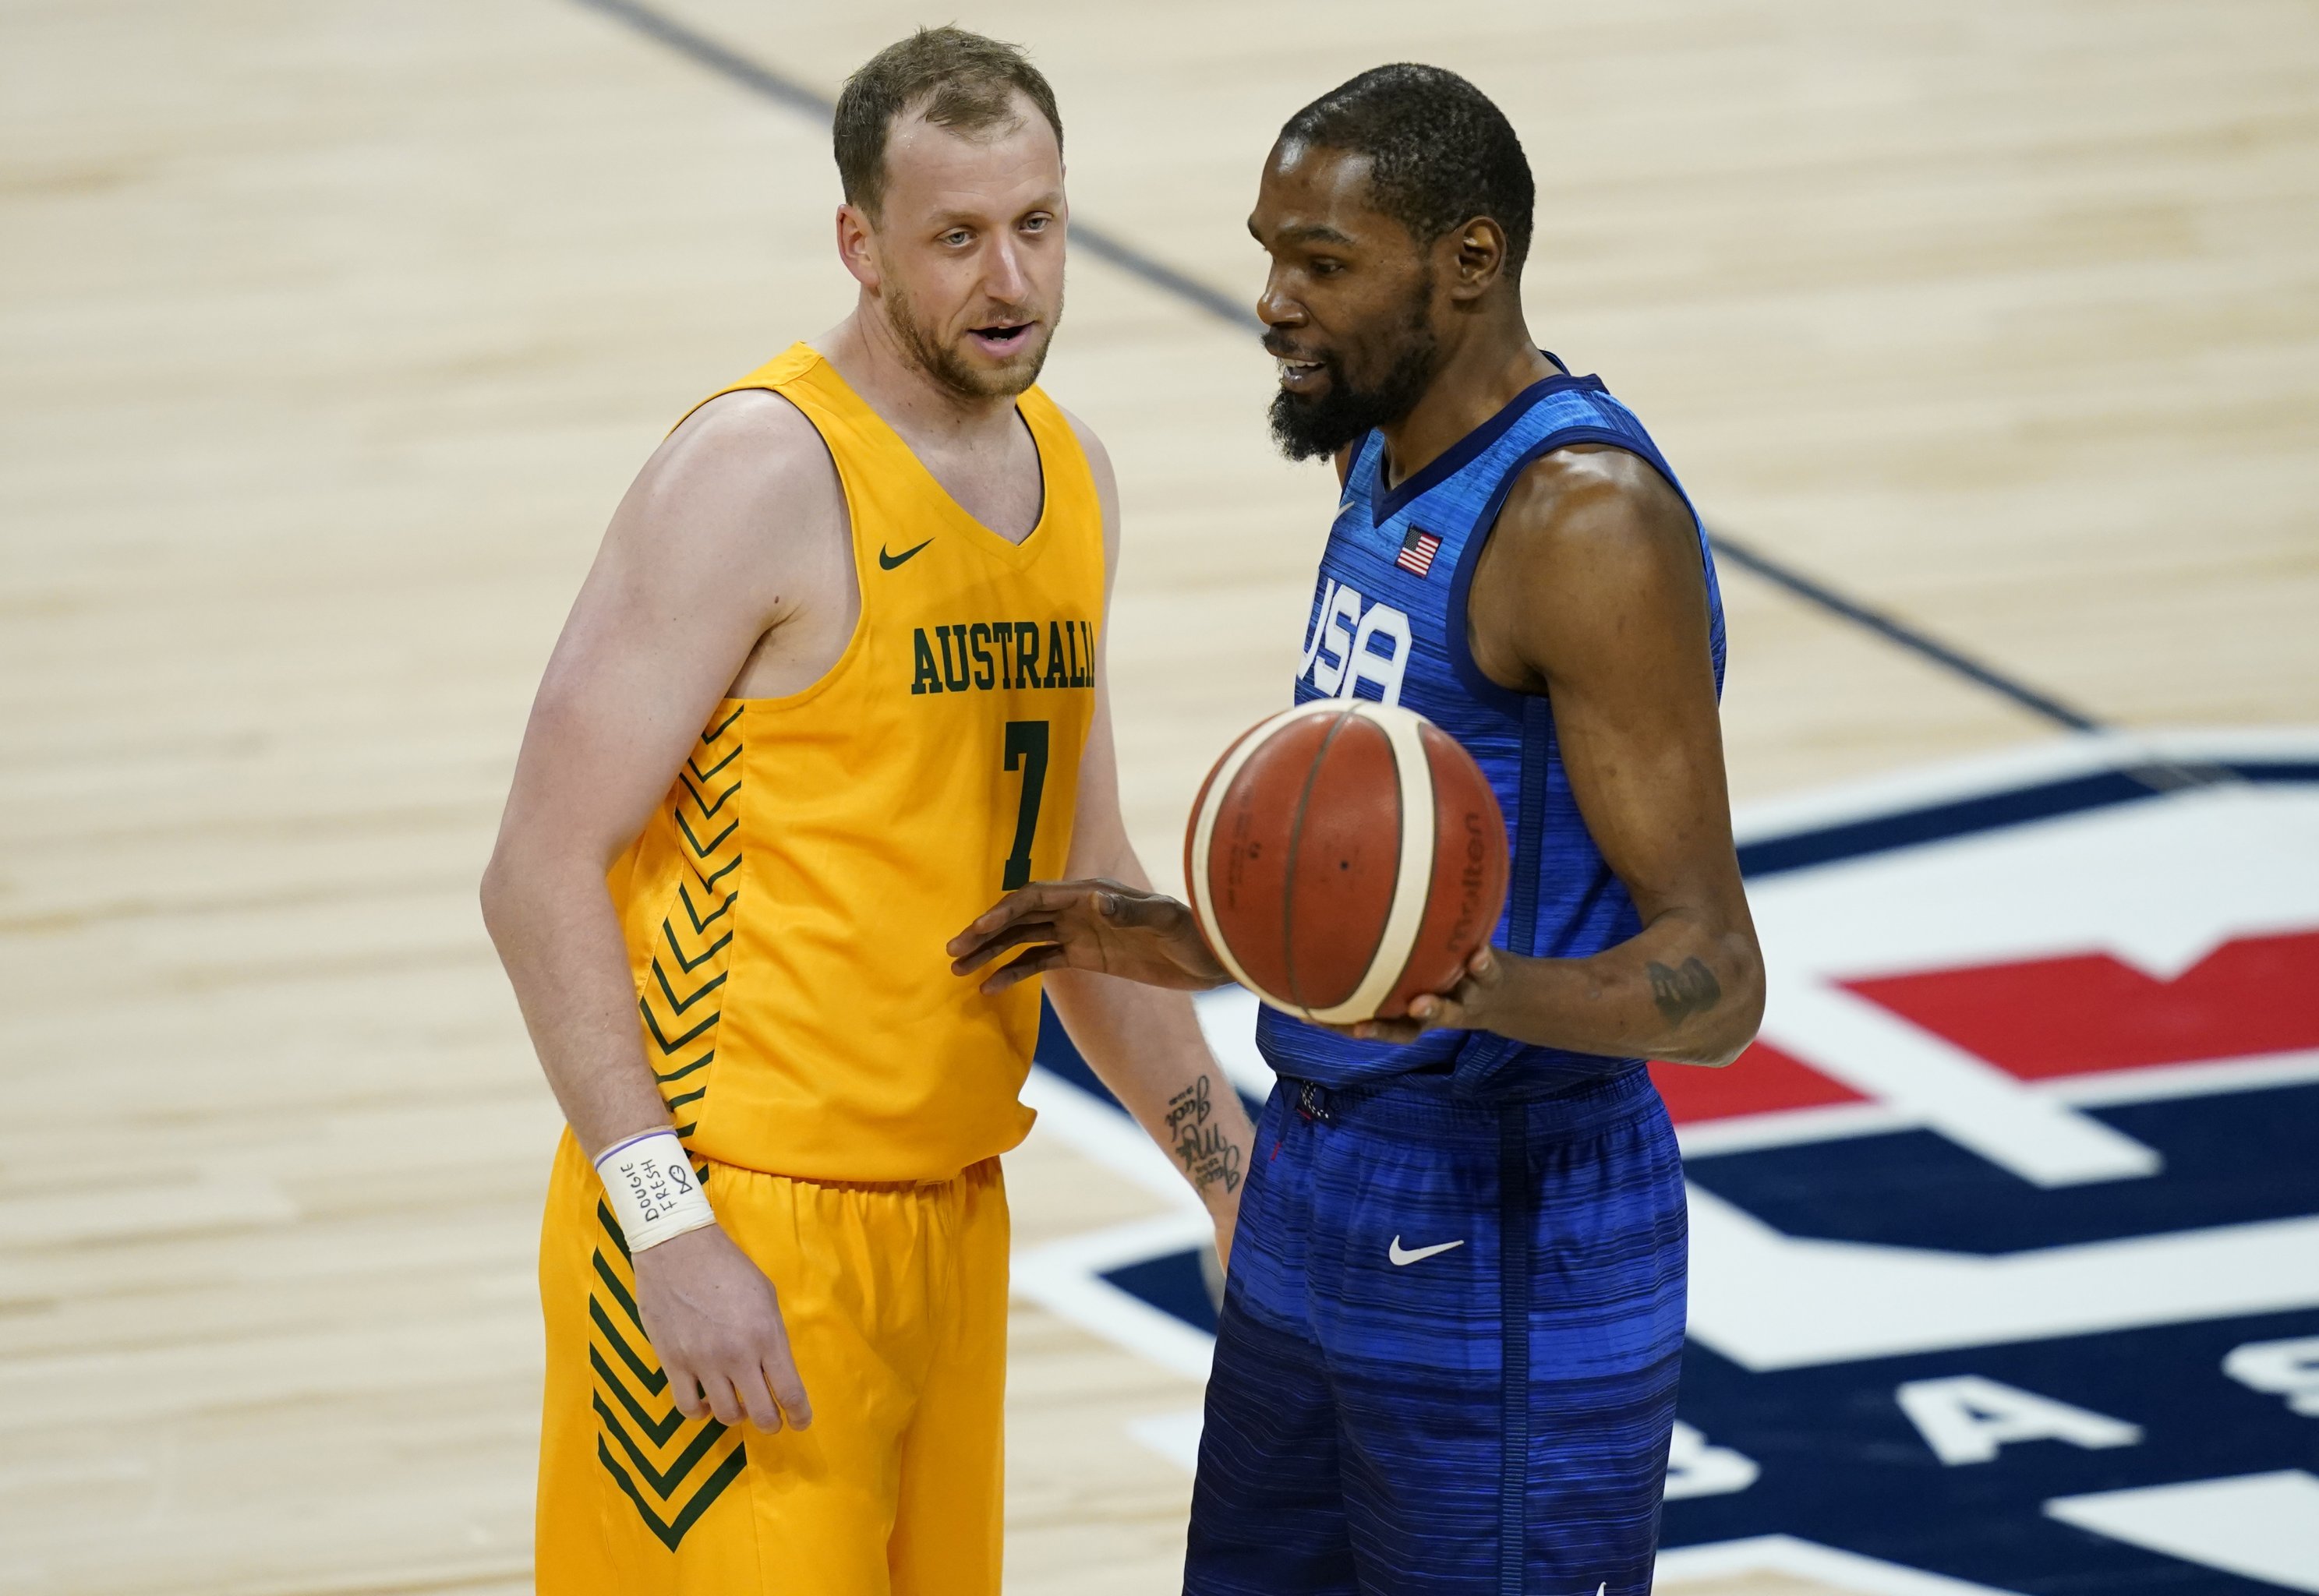 Olympics 2021 Men's Basketball Quarterfinals: Slovenia vs Germany  Prediction & Match Preview - August 3rd, 2021